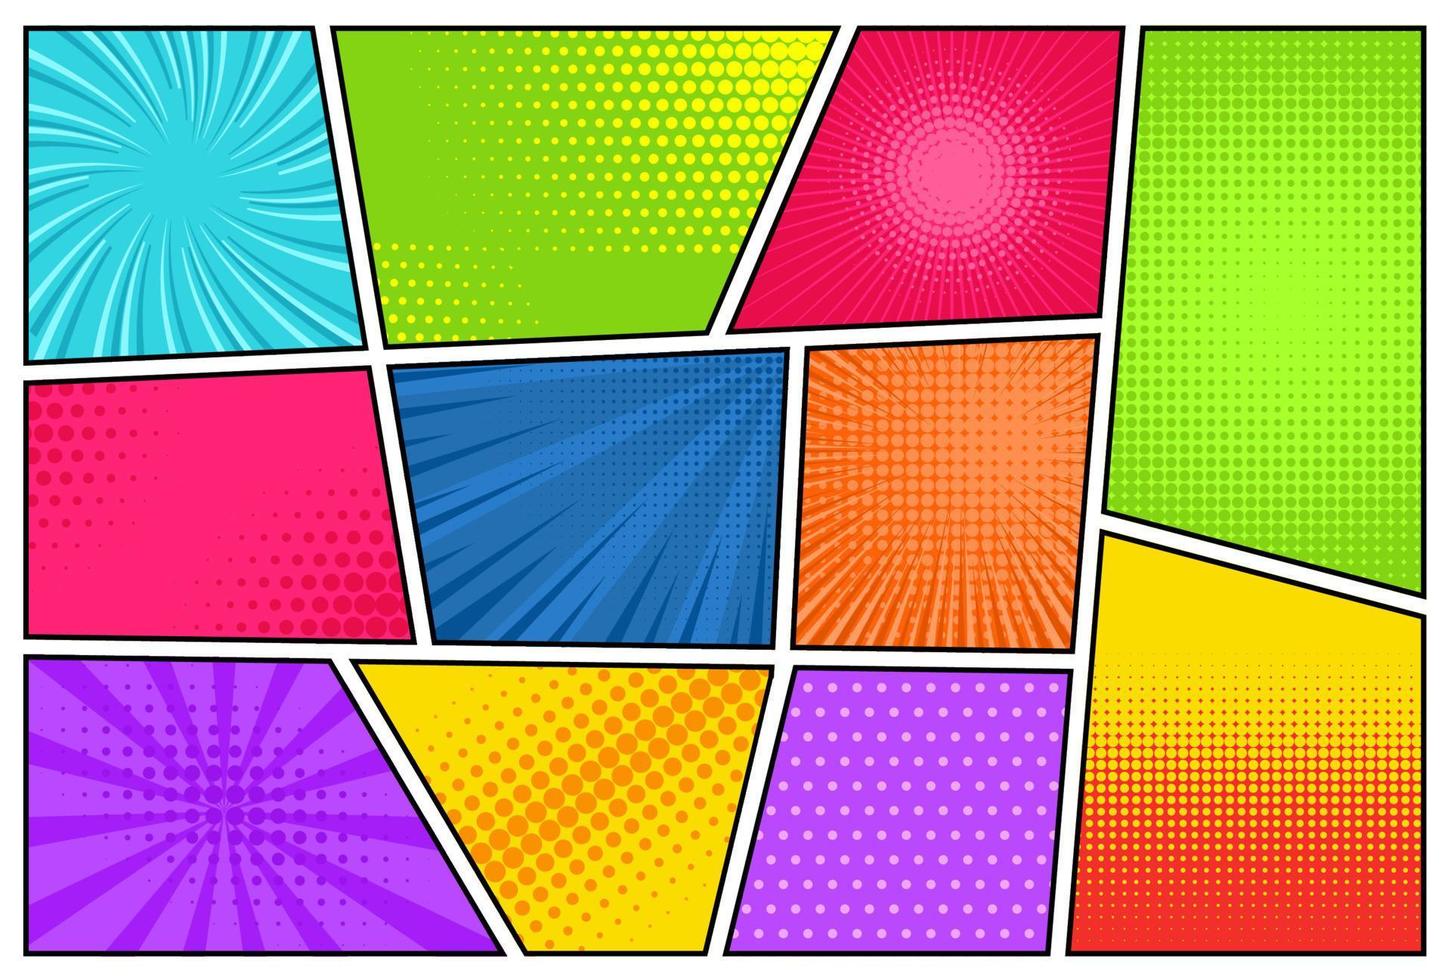 Comic backgrounds. Manga, pop art backdrops in frames. Superhero explosion texture with halftone effect. Vintage vector templates set